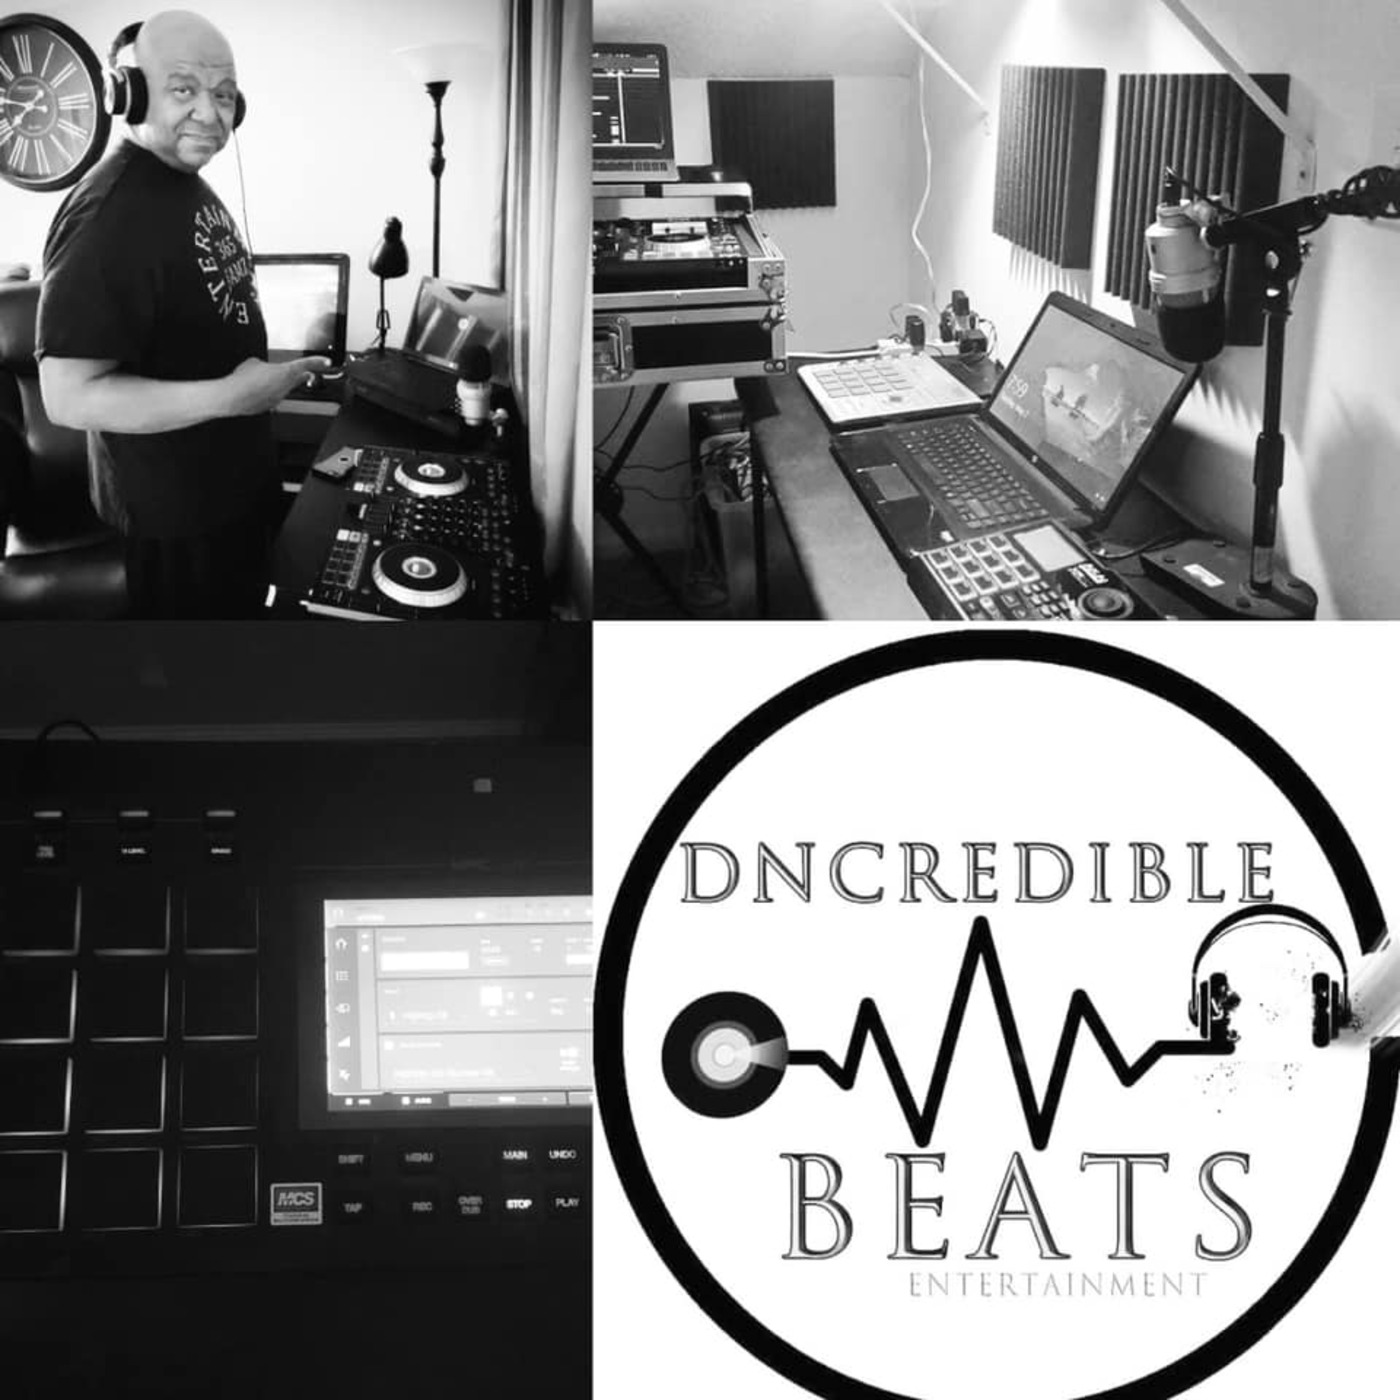 DNCREDIBLE DJ FREDDIE FRED's Podcast